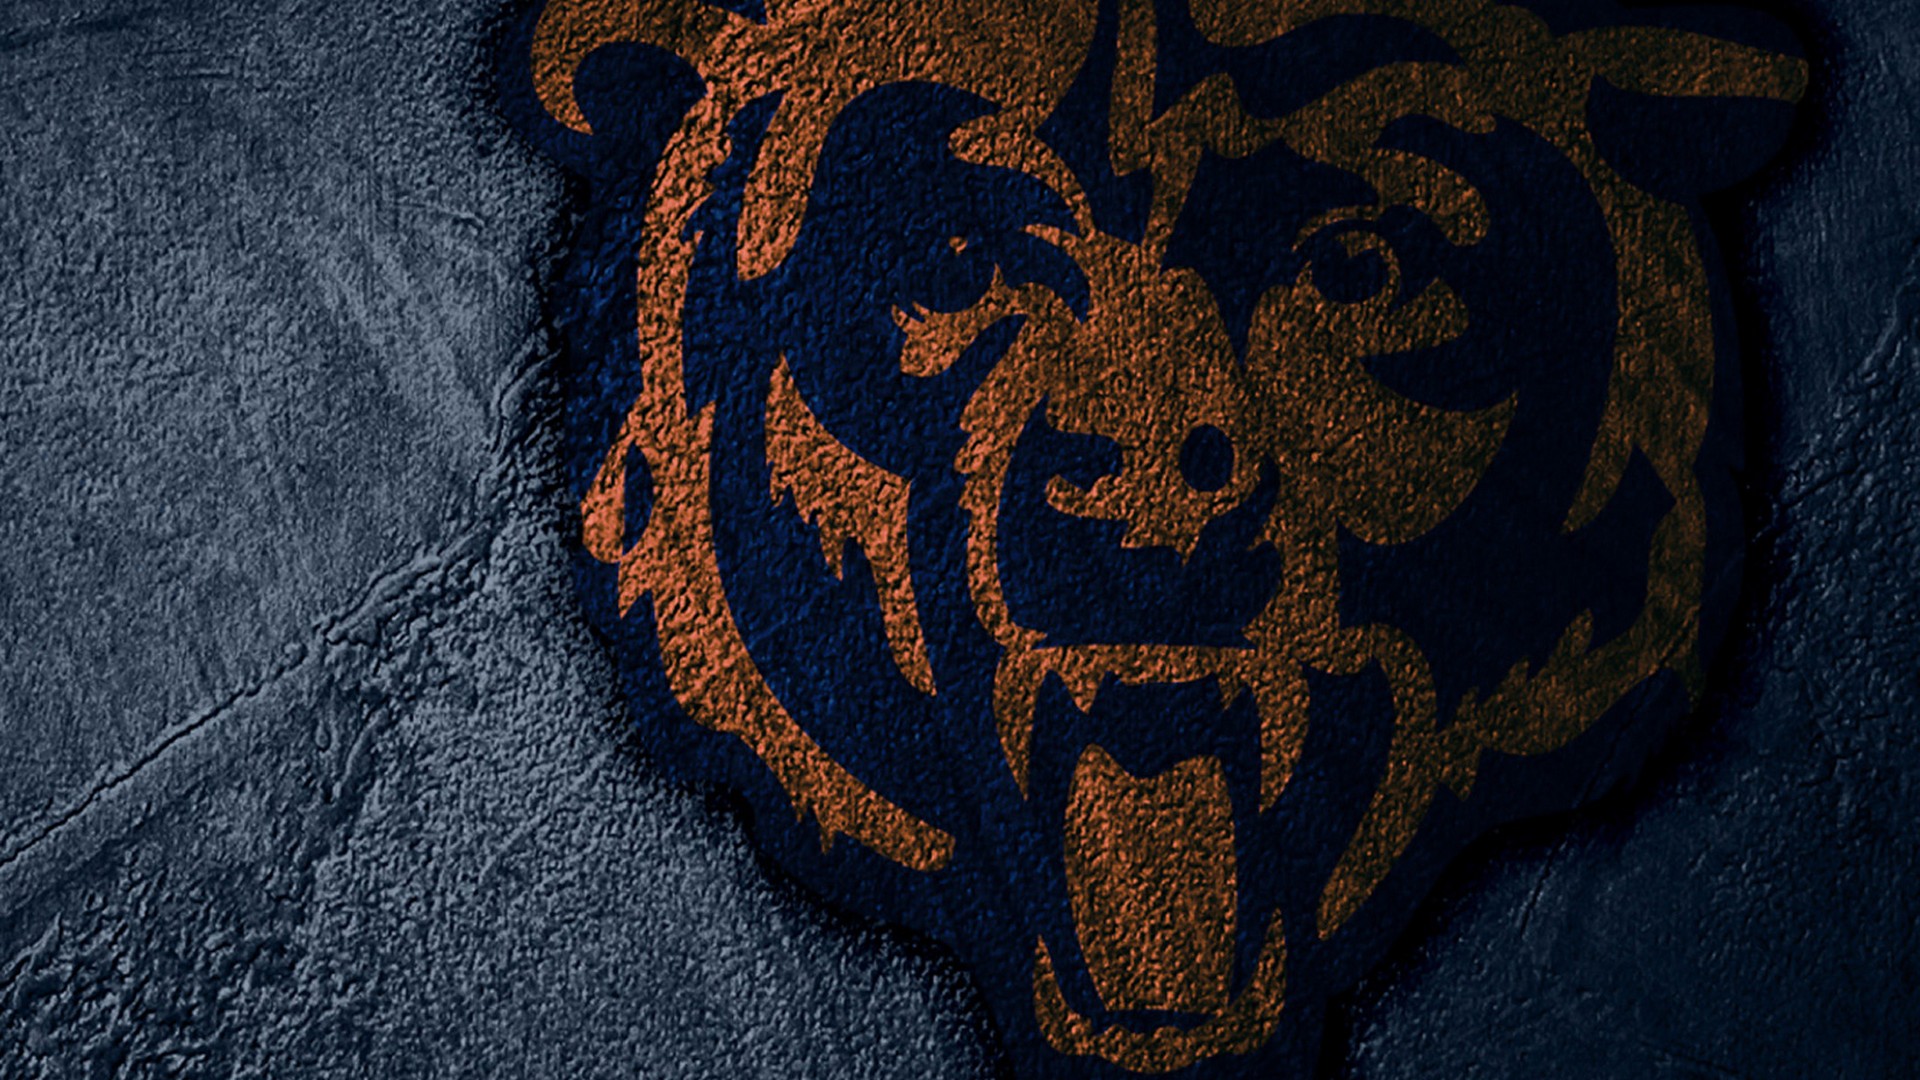 HD Chicago Bears Backgrounds With Resolution 1920X1080